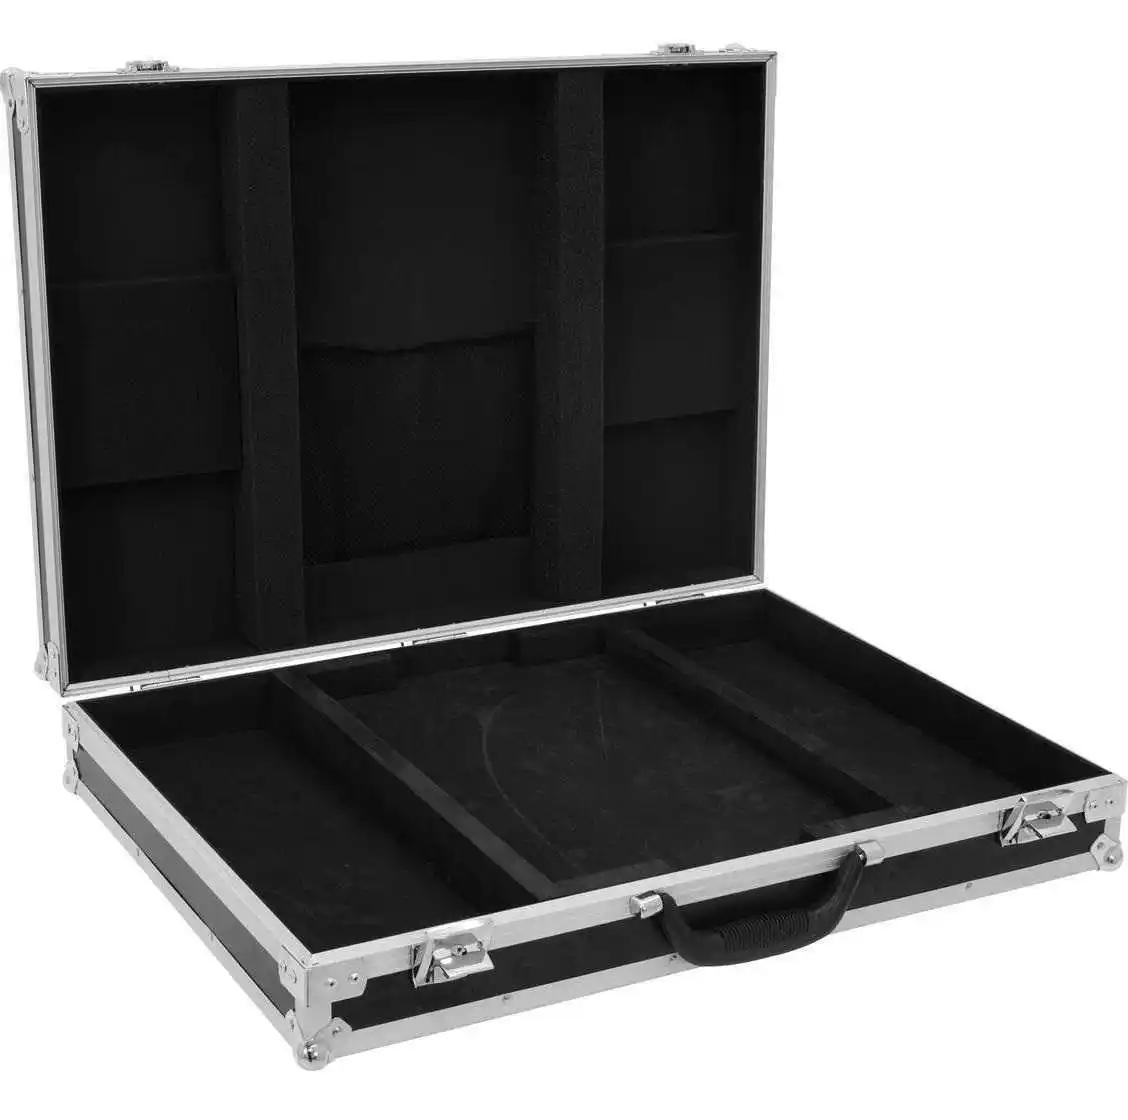 Aluminium Case Protective Safe Storage Flight Case with Cubed Foam Insert and Lid Foam